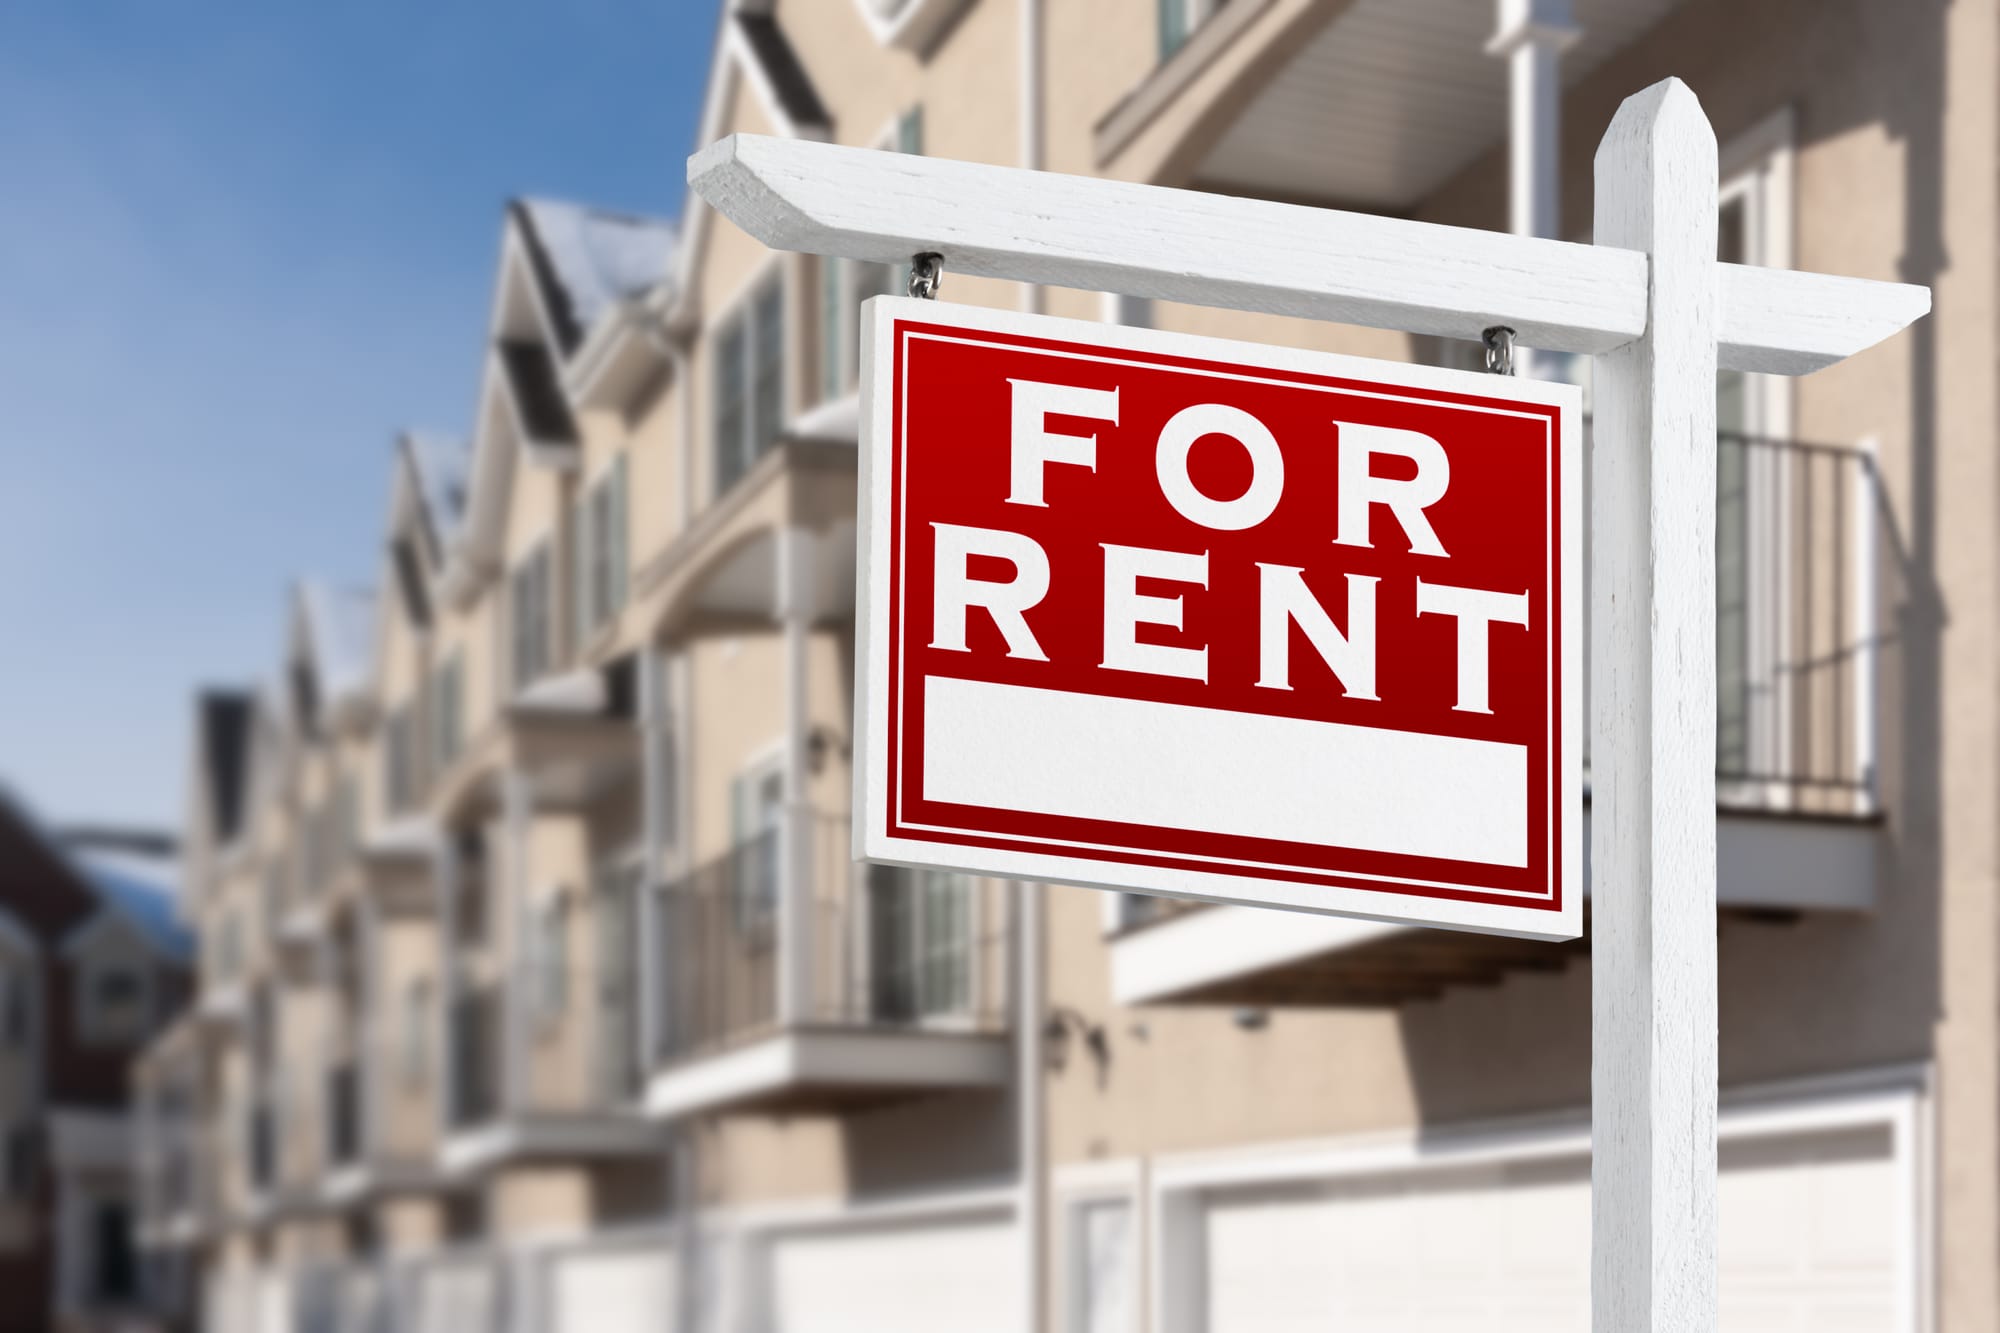 Rental costs climbing quickly in the area